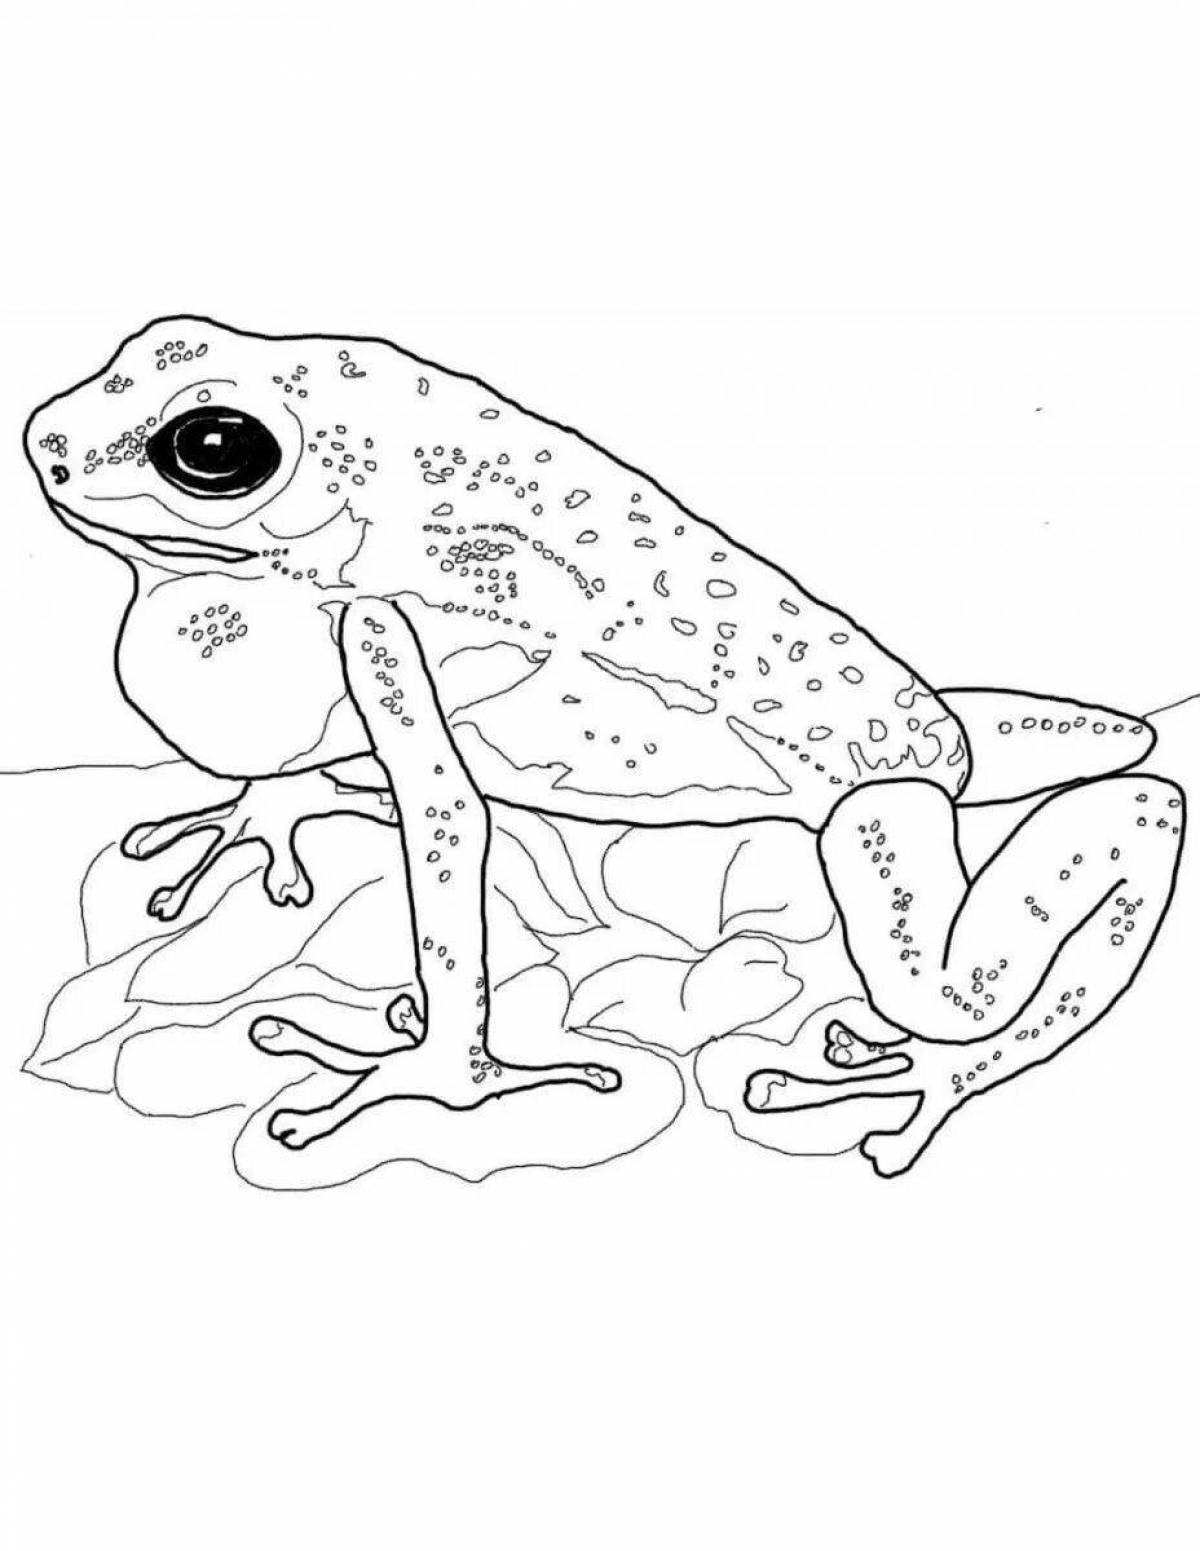 Coloring book magnificent tree frog